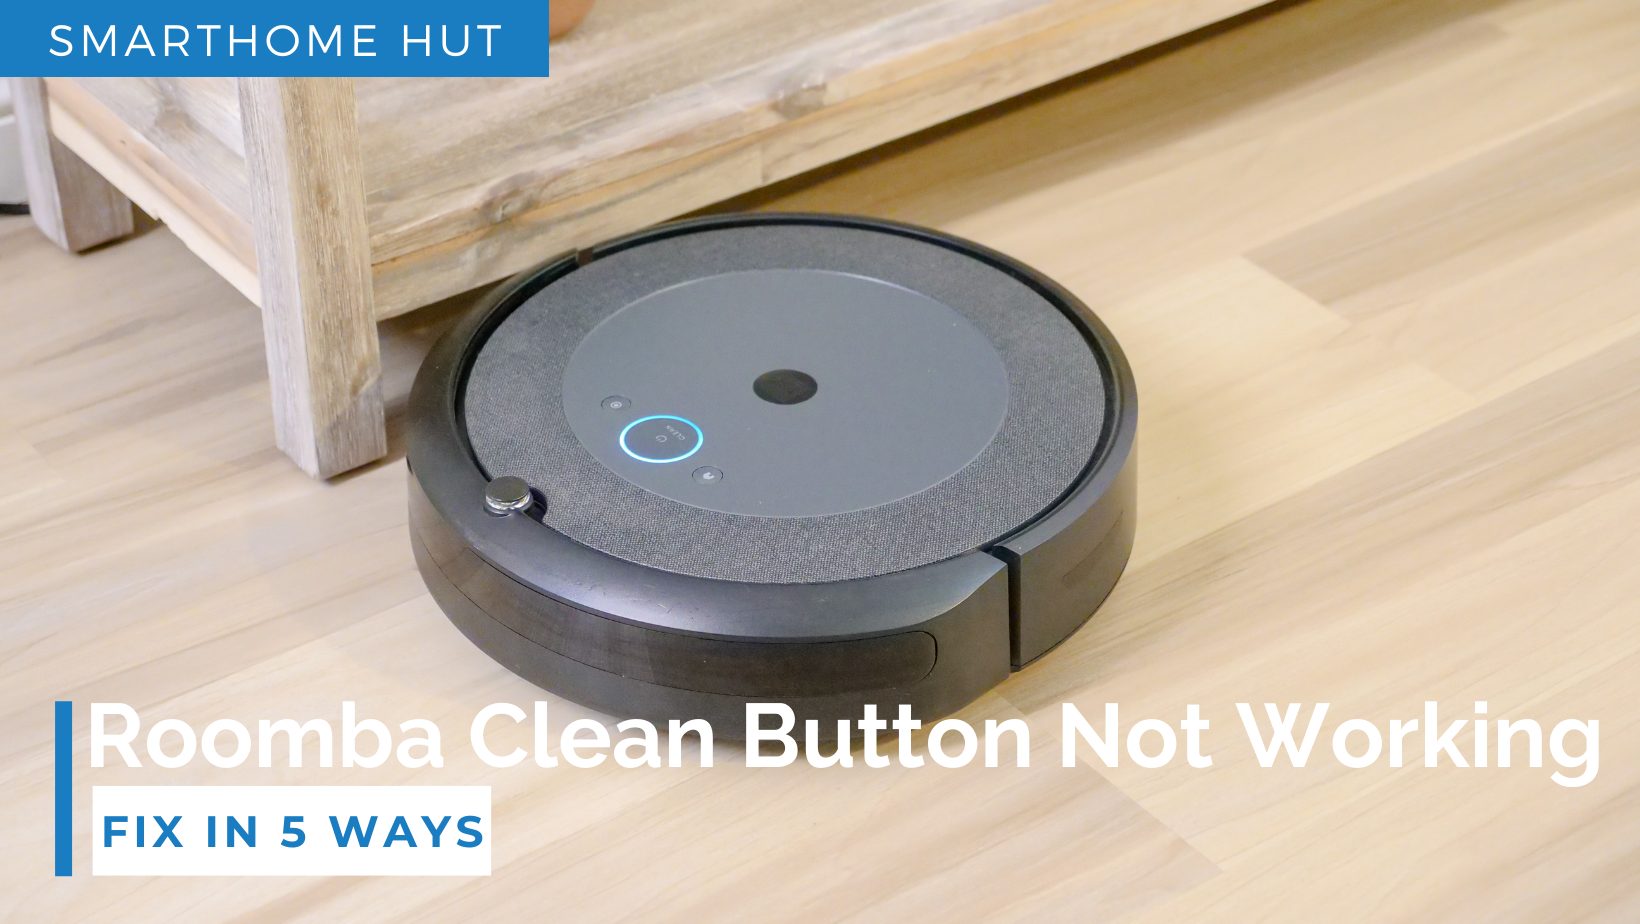 Roomba Clean Button Not Working